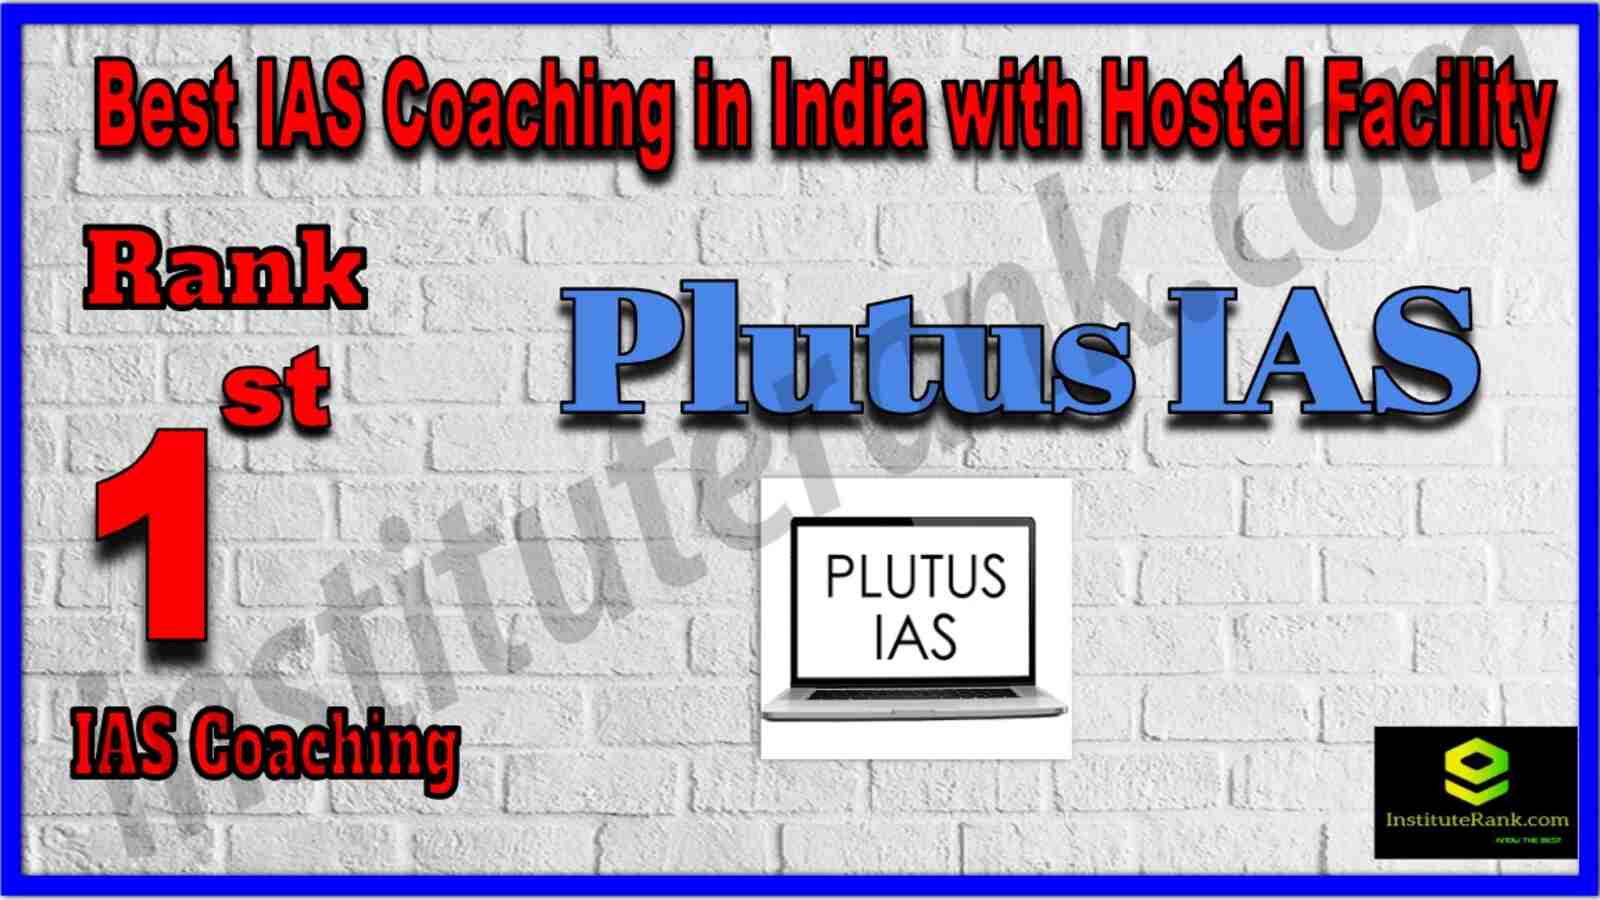 Rank 1 Best IAS Coaching in India With Hostel Facility